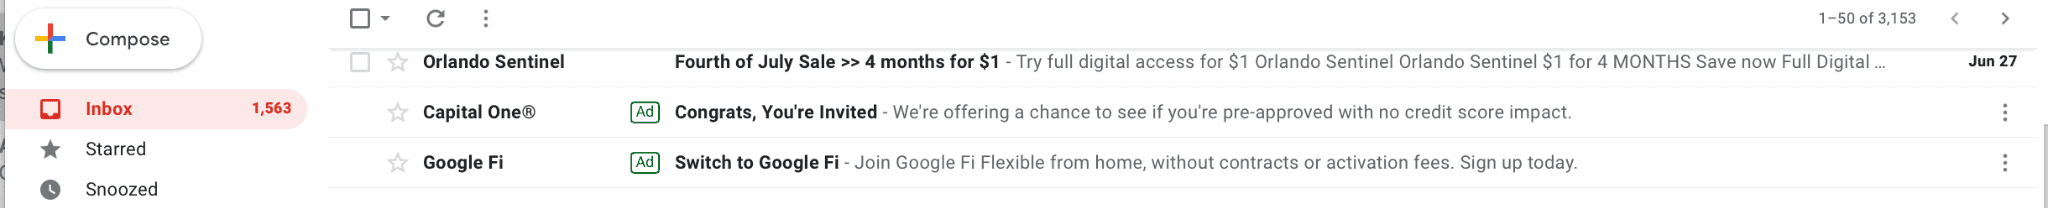 gmail ad example